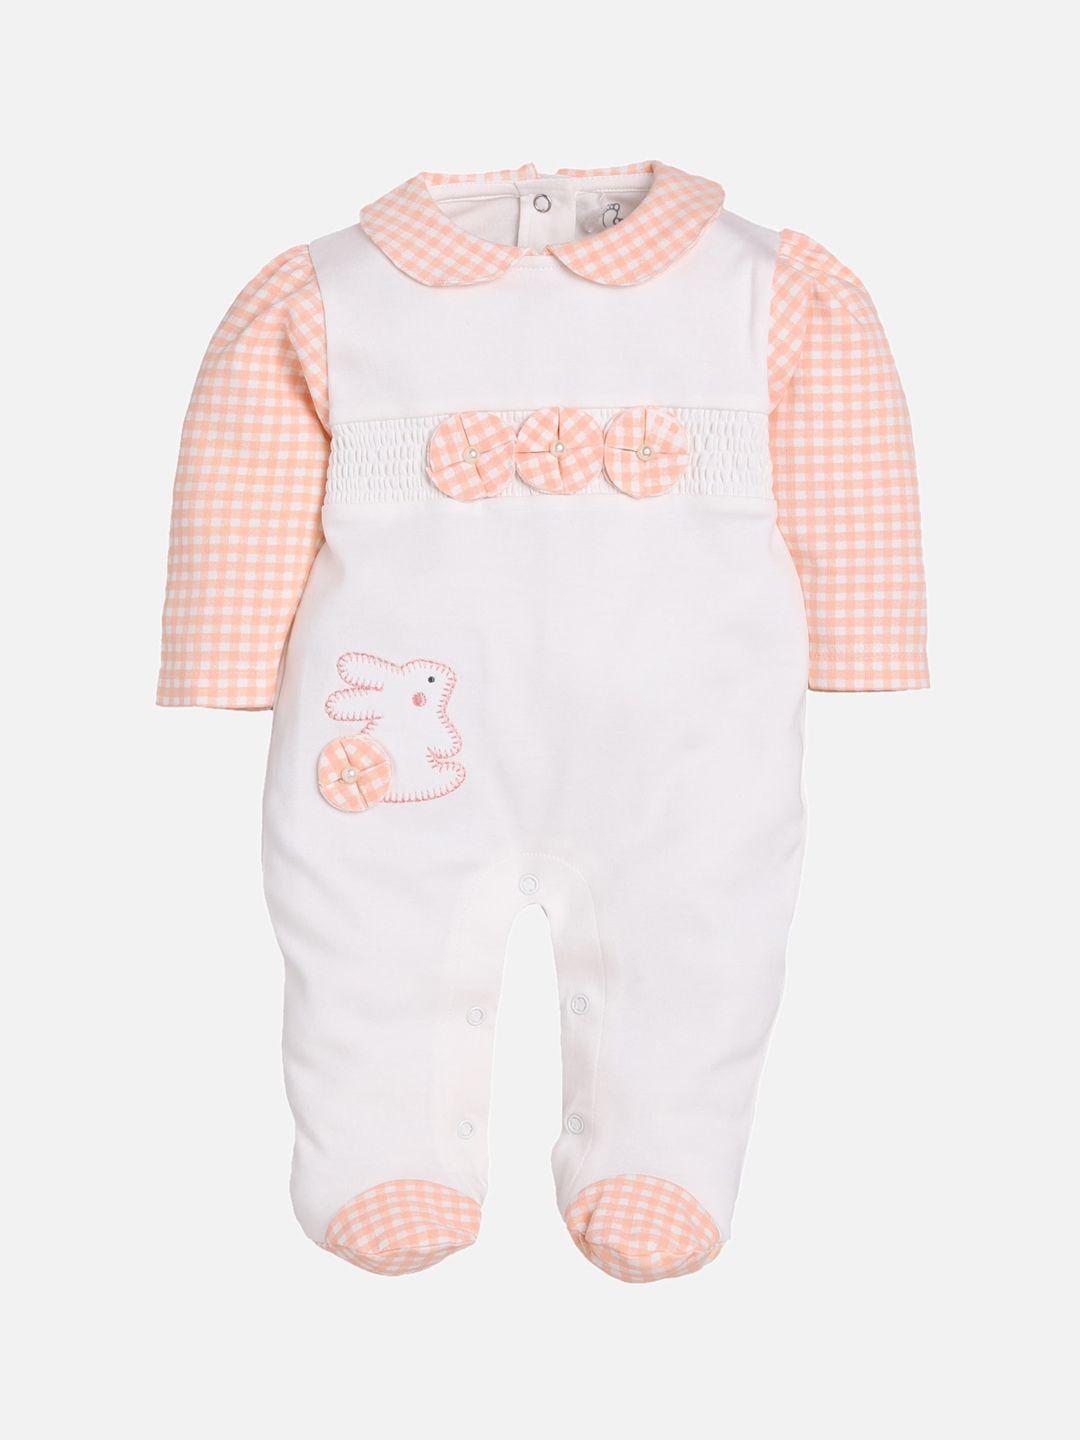 BABY GO Infants Kids White & Peach Solid Cotton Rompers With Applique Ornamentation